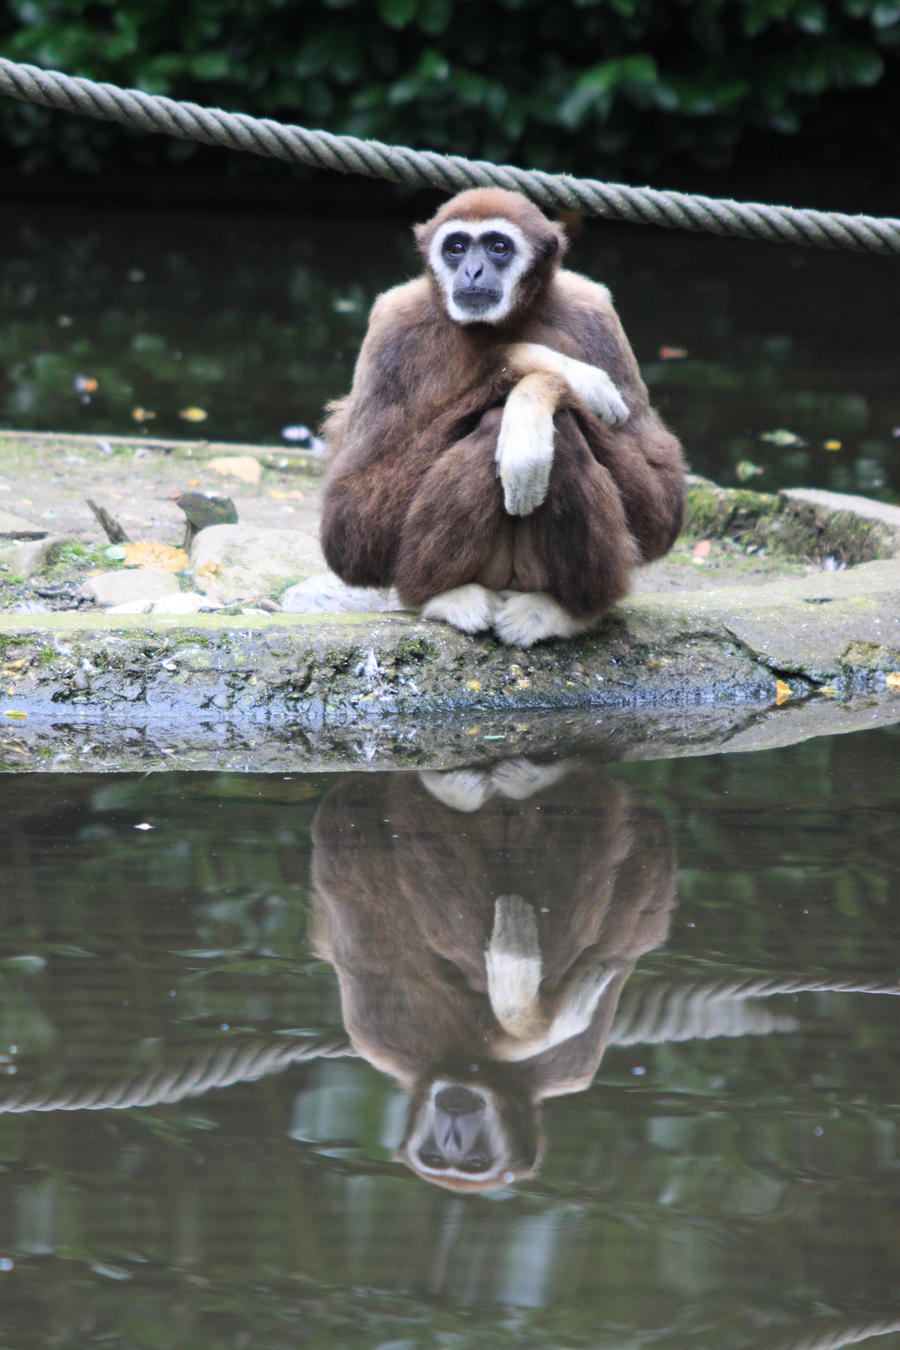 Monkey reflected in the water